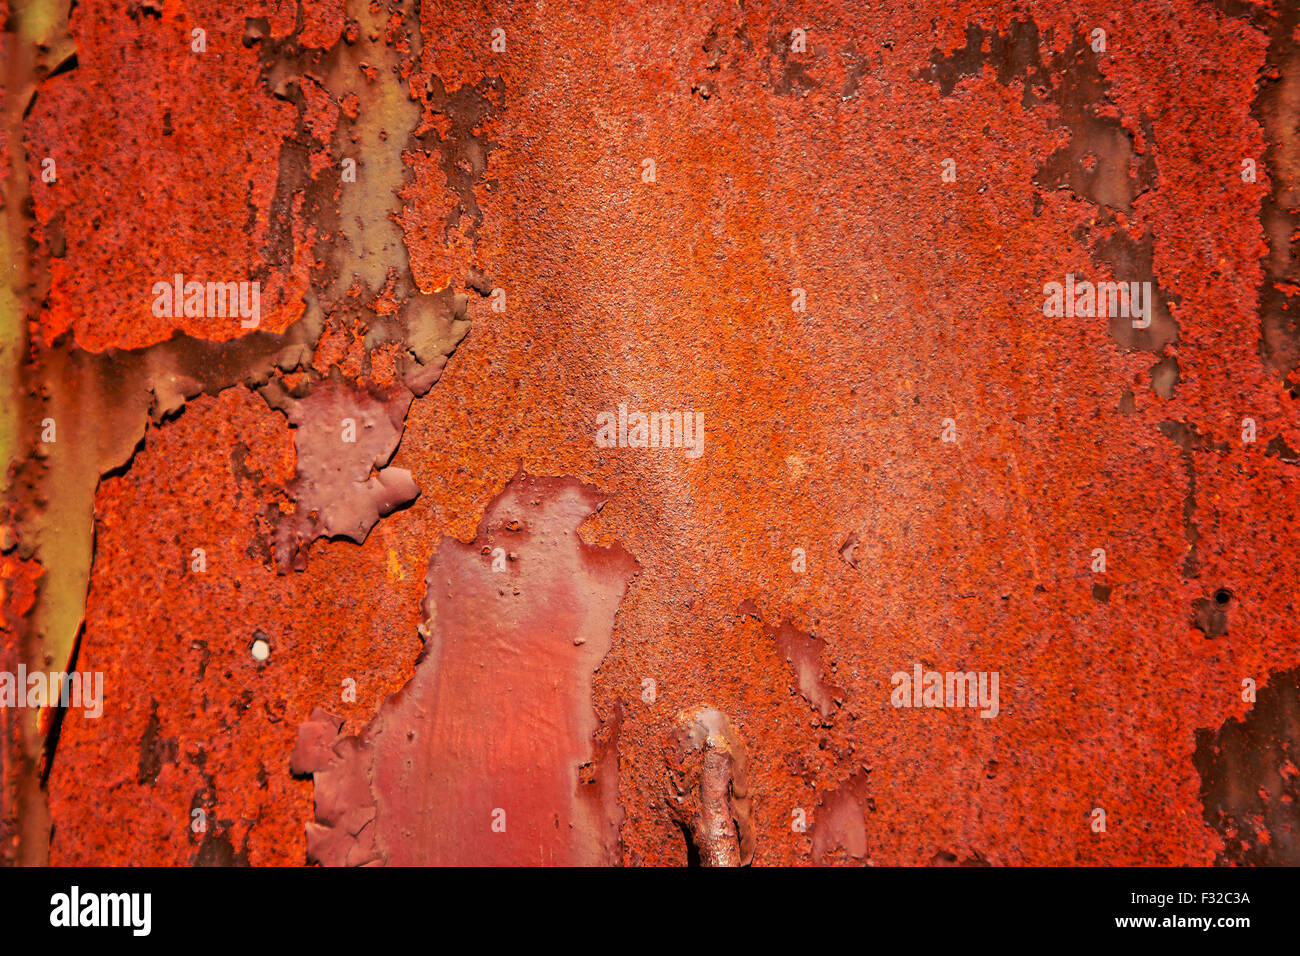 Image of rusty red metal. Stock Photo